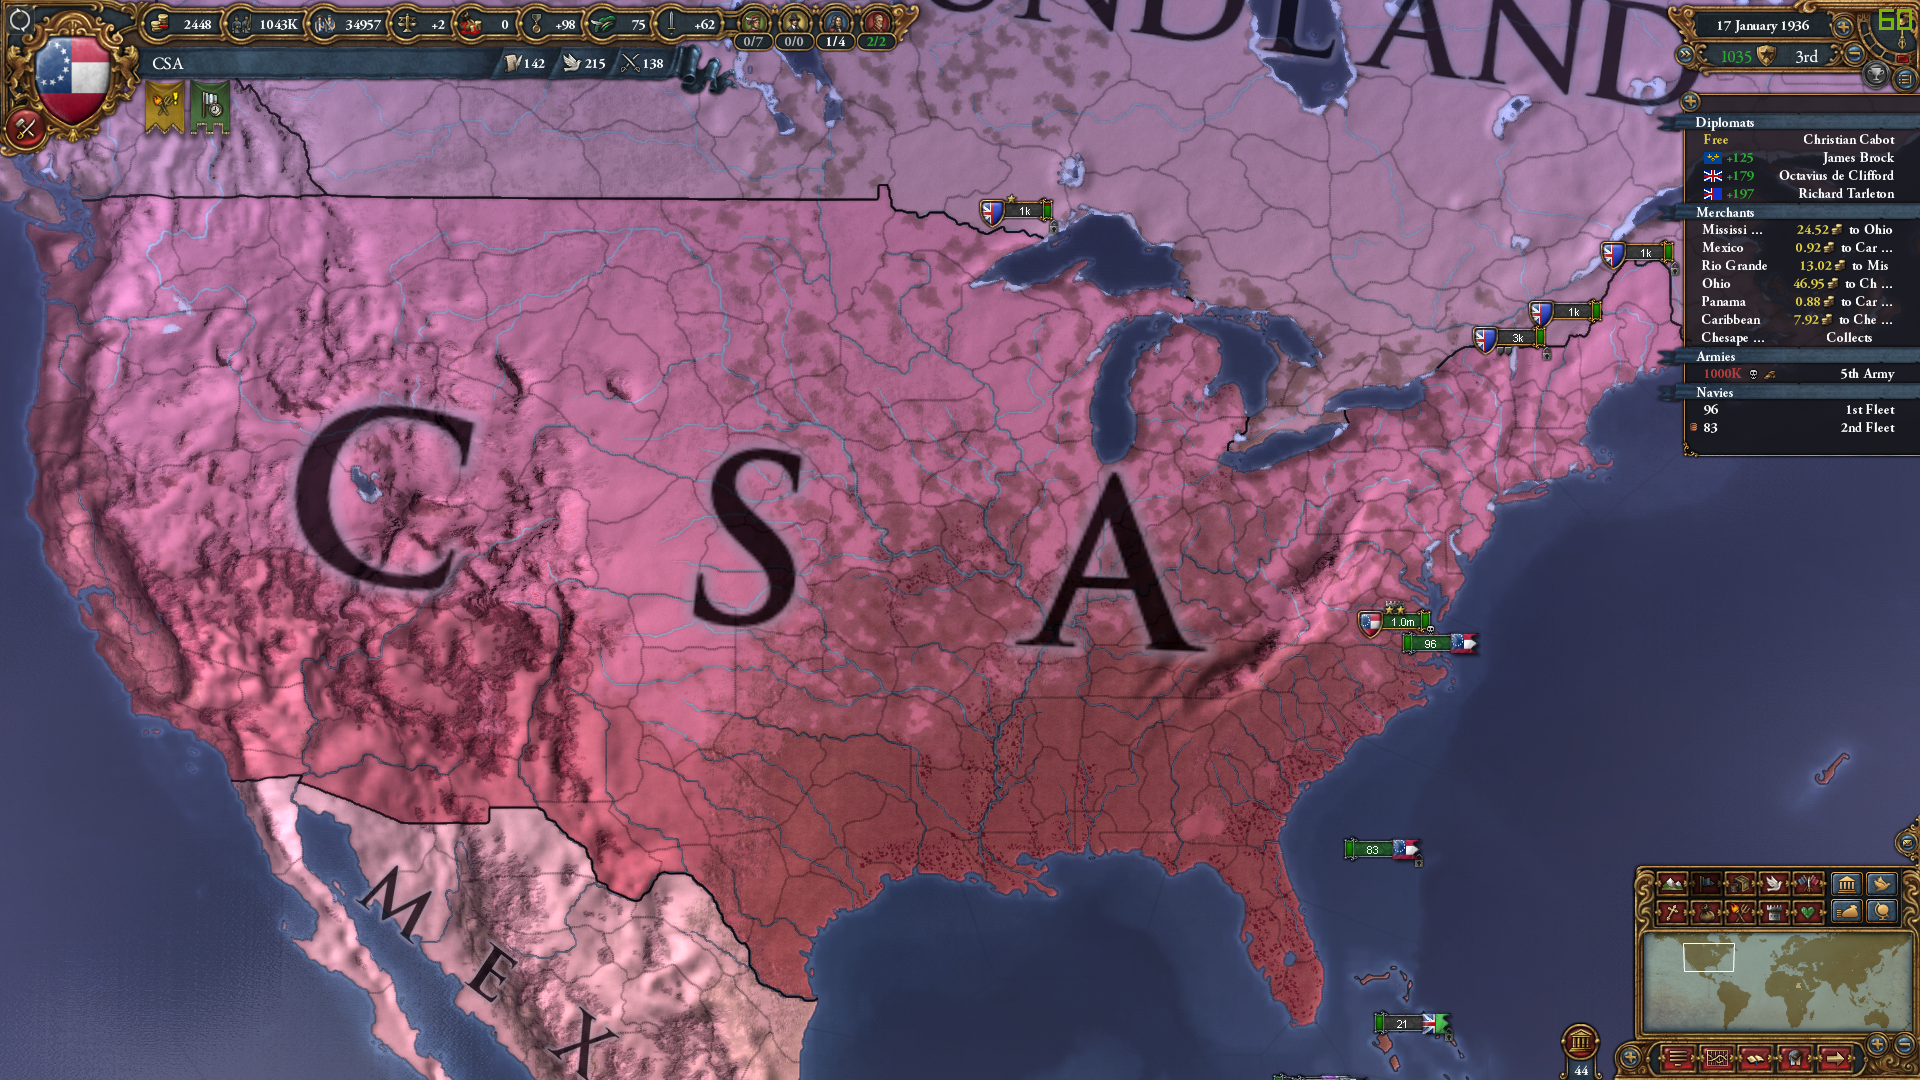 europa universalis 4 extended timeline mod direct download